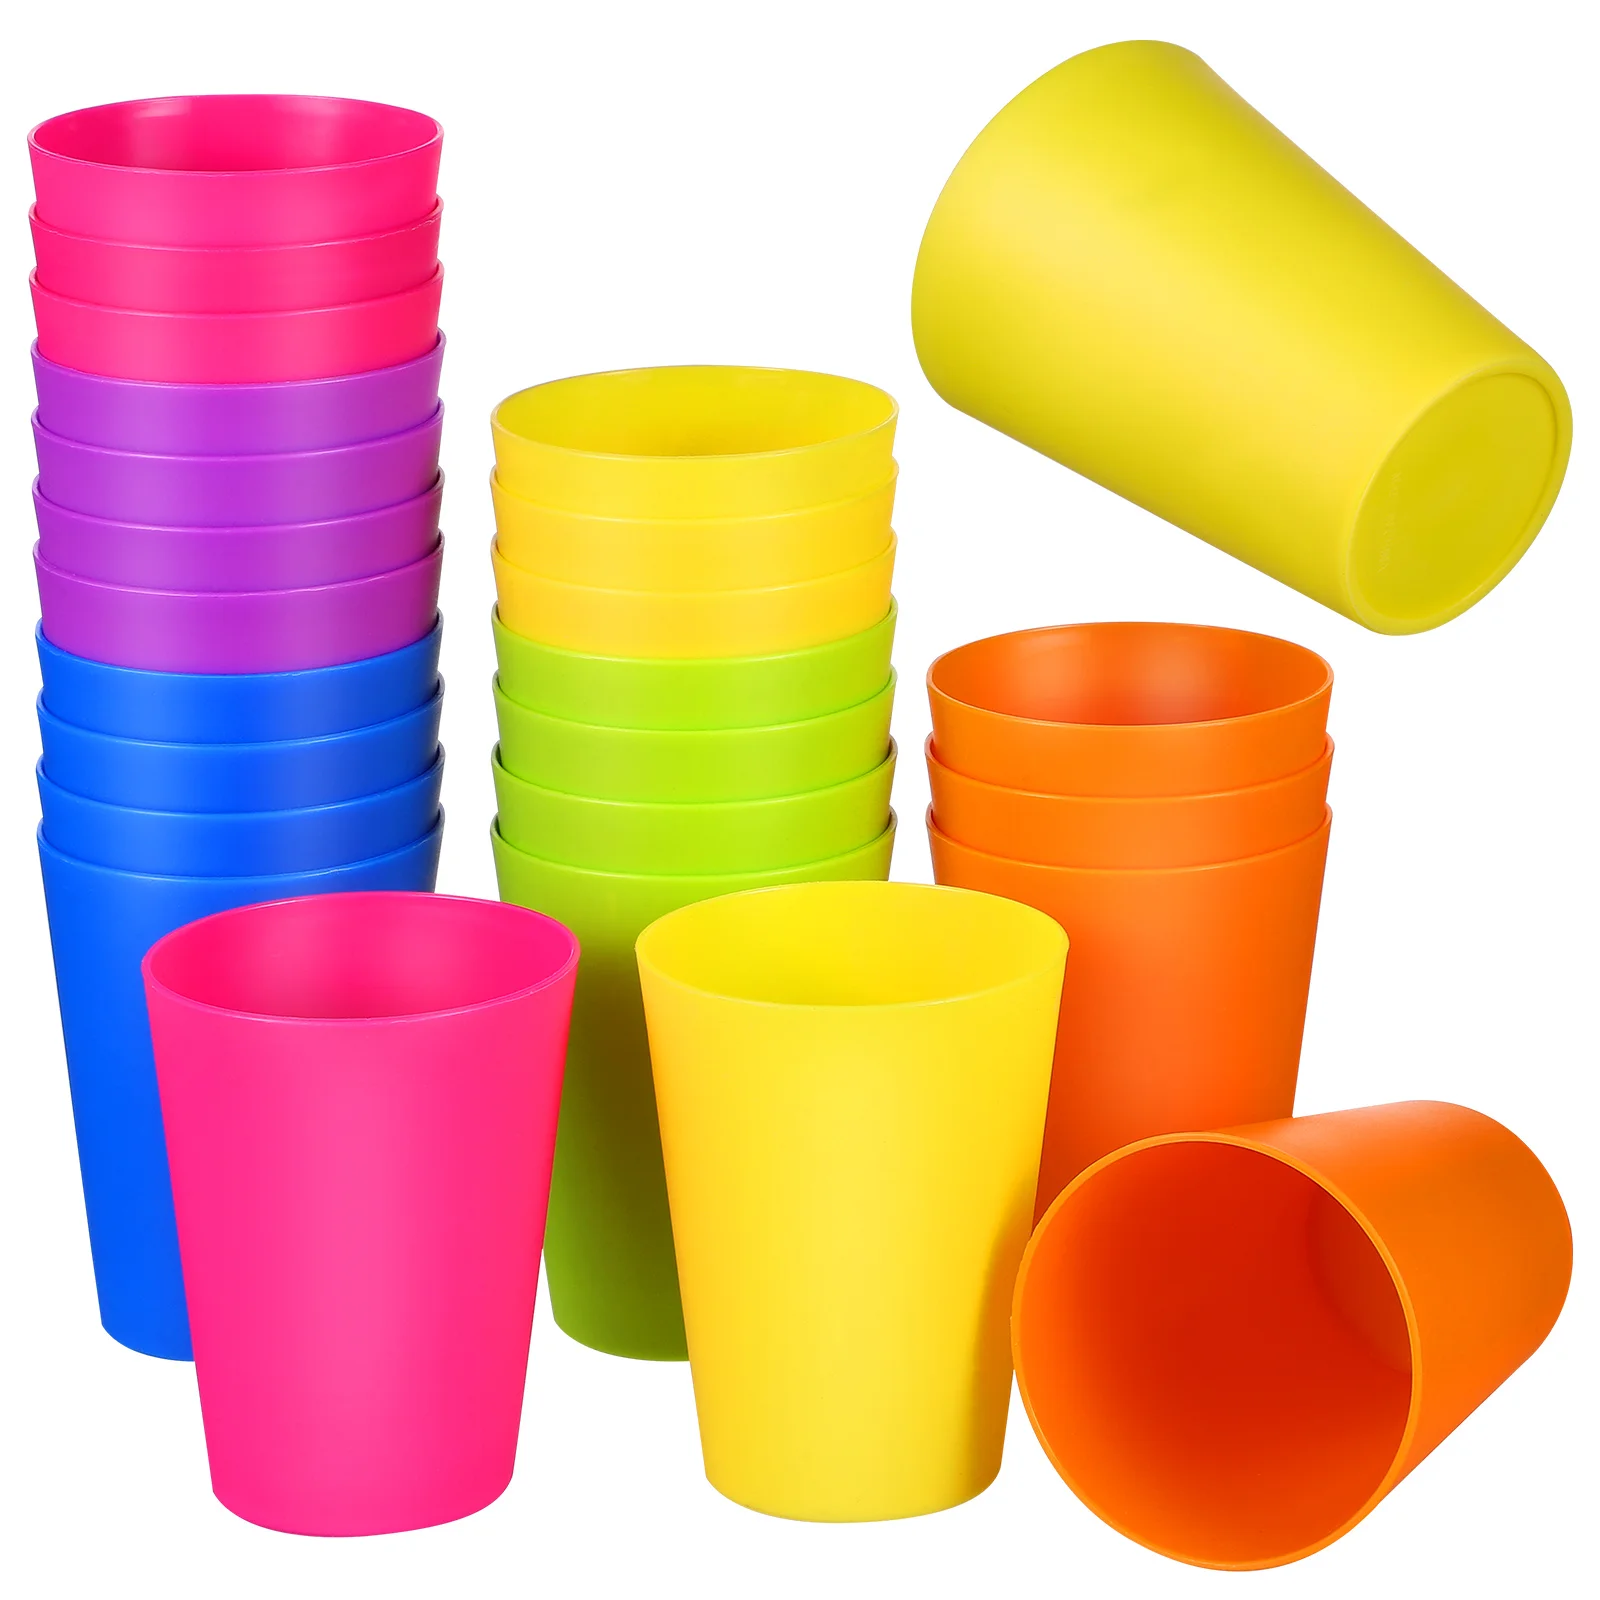 

24 Pcs Safe Lightweight Stackable Reusable Beverage Cups Drinking Cups Bear Cups Plastic Drinking Cups